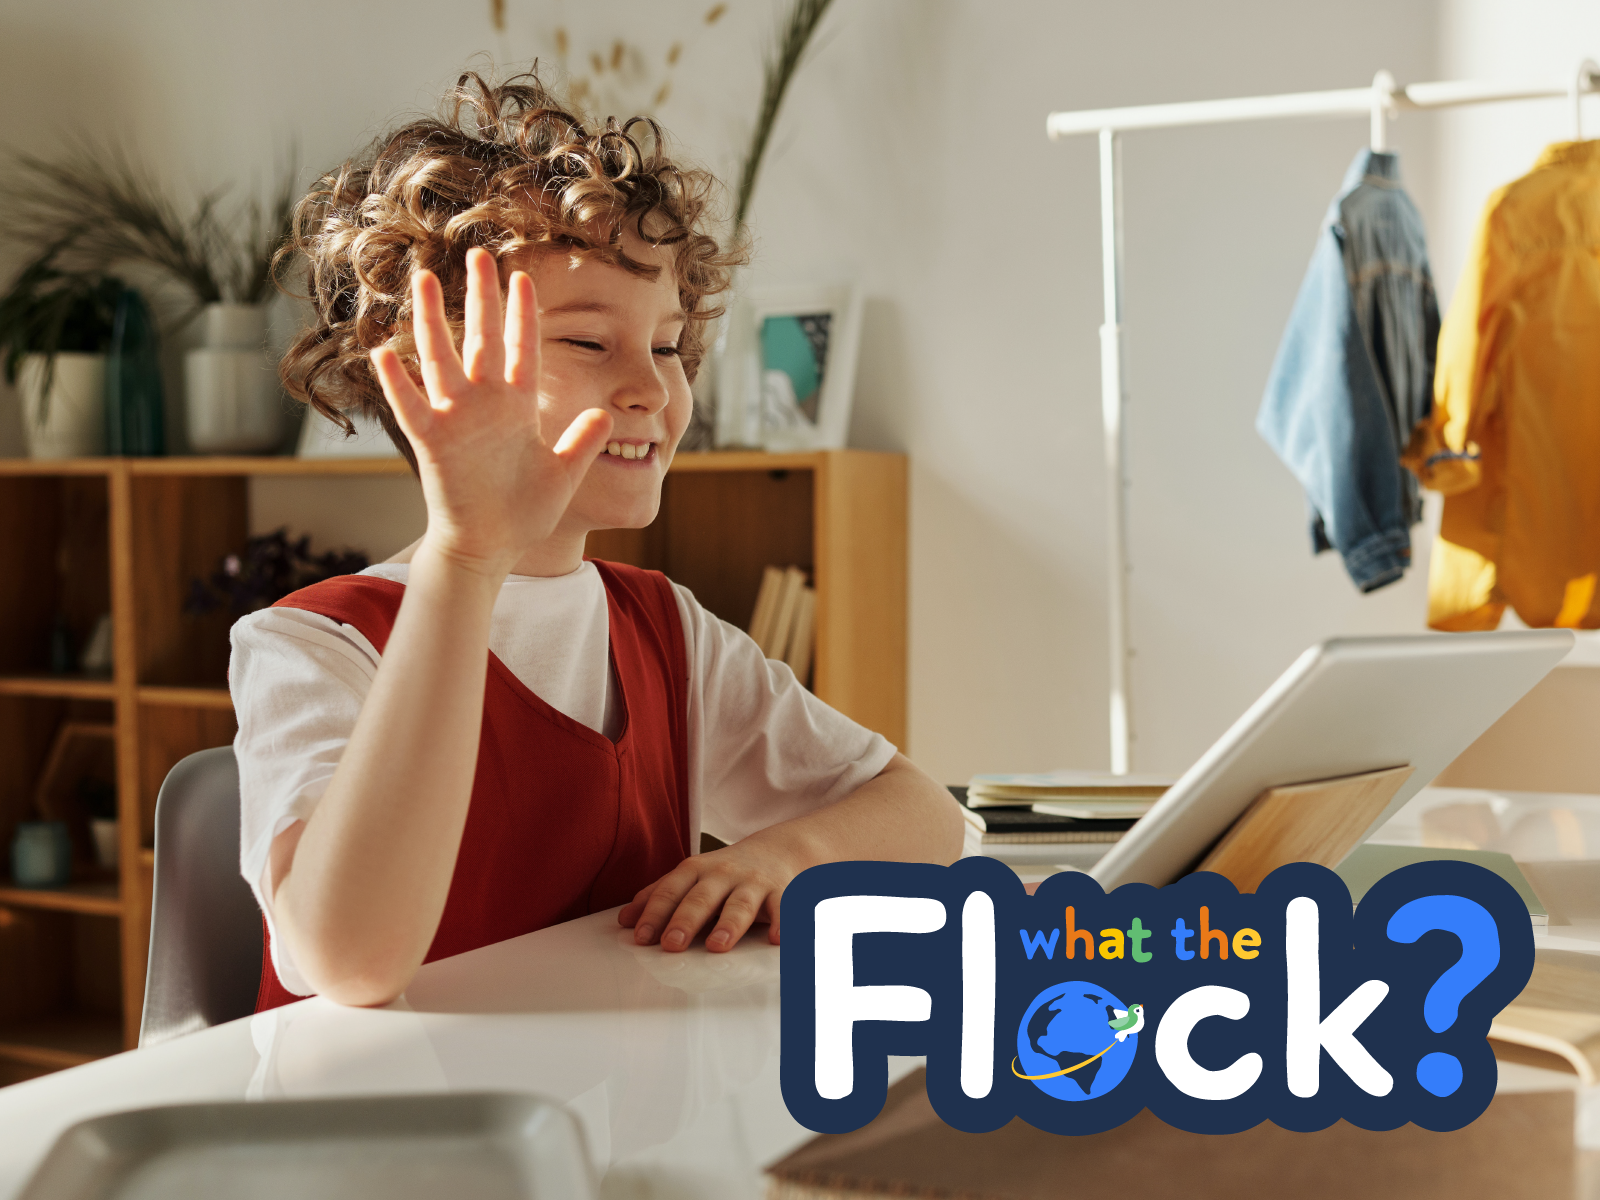 Young student on video call with What The Flock logo in corner